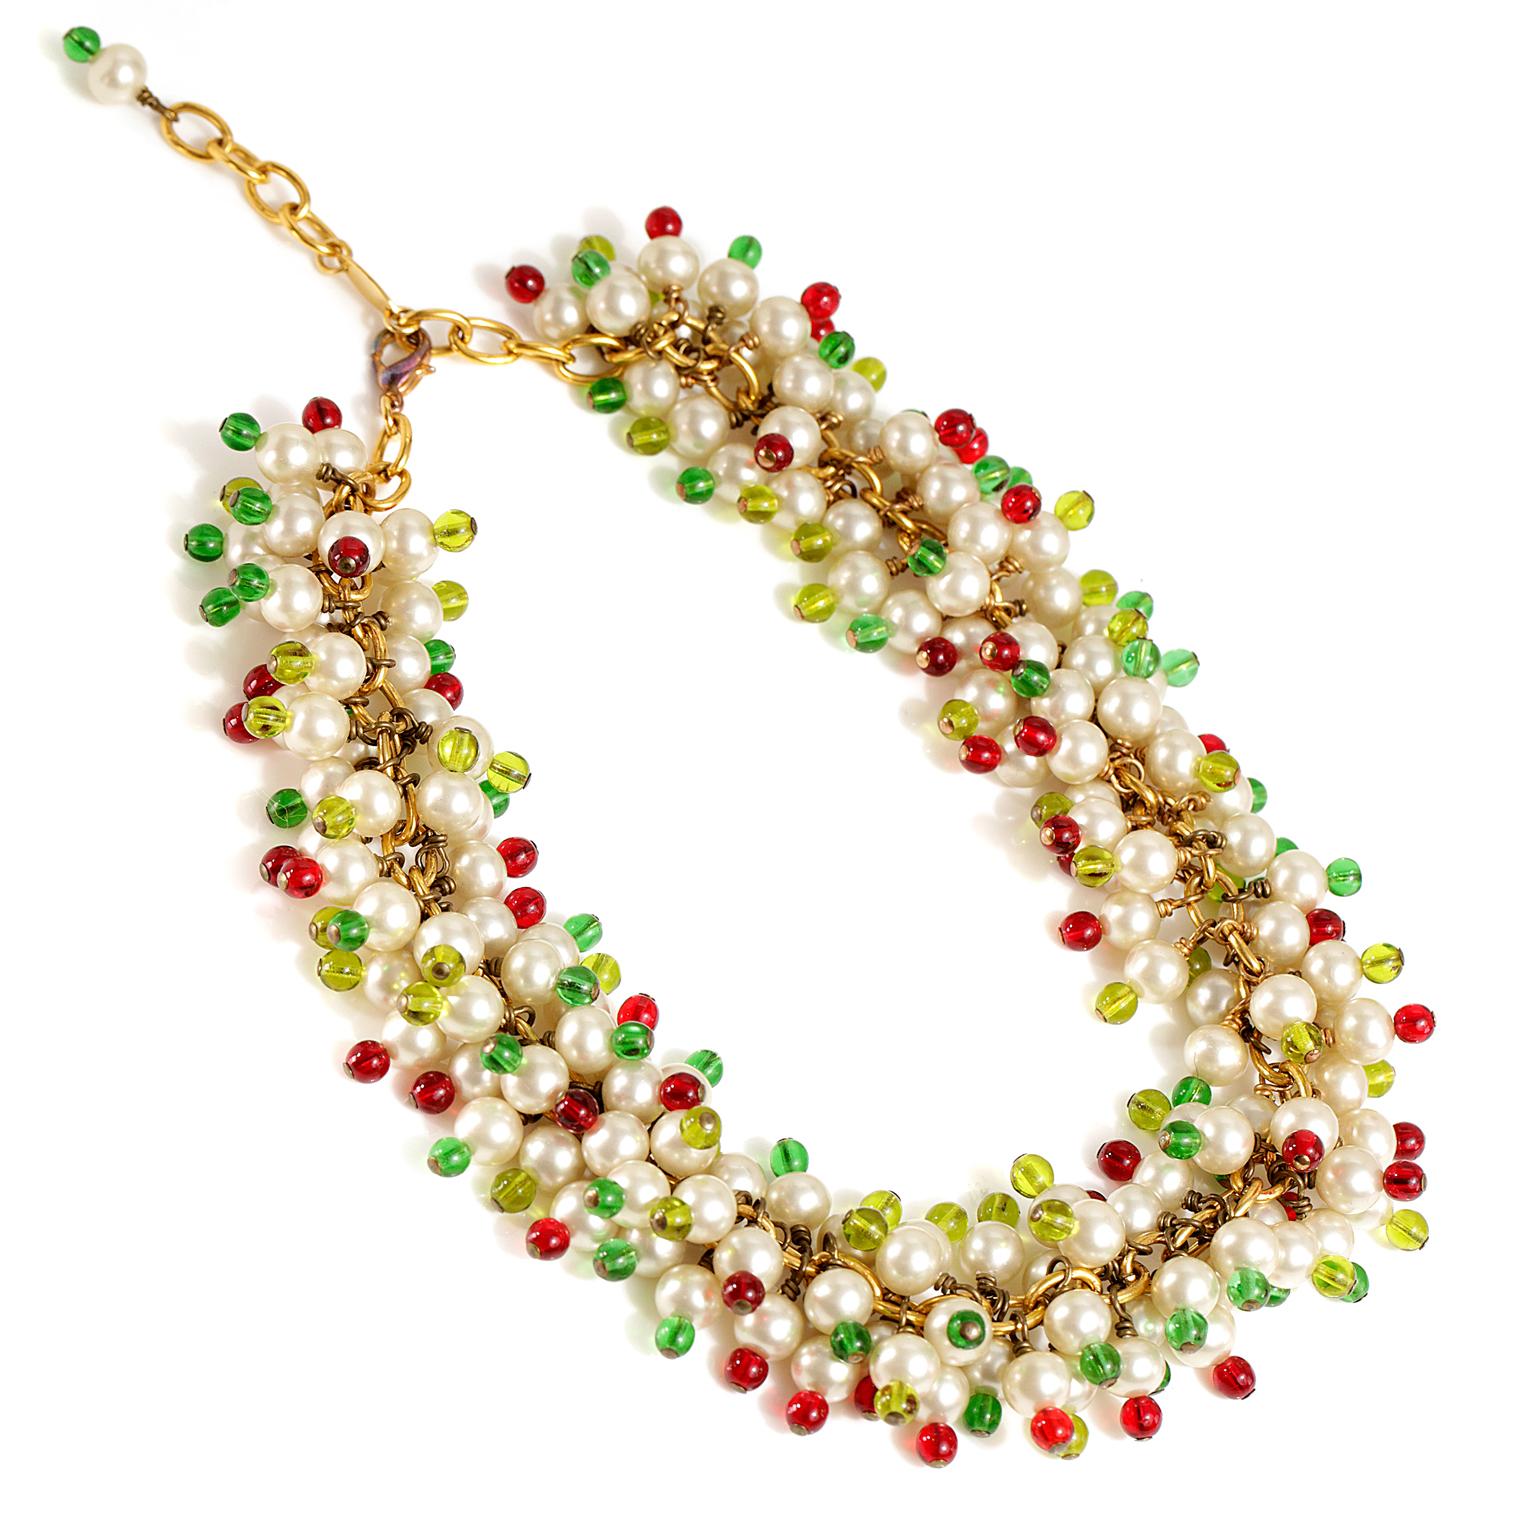 Chanel Gripoix Pearl Cluster Necklace- mint condition 
 From season 26 collection, 1980’s. 
Faux pearl grape clustered necklace with red and green beaded accents.  Gold tone chain with adjustable length lobster claw closure.  Made in France.

